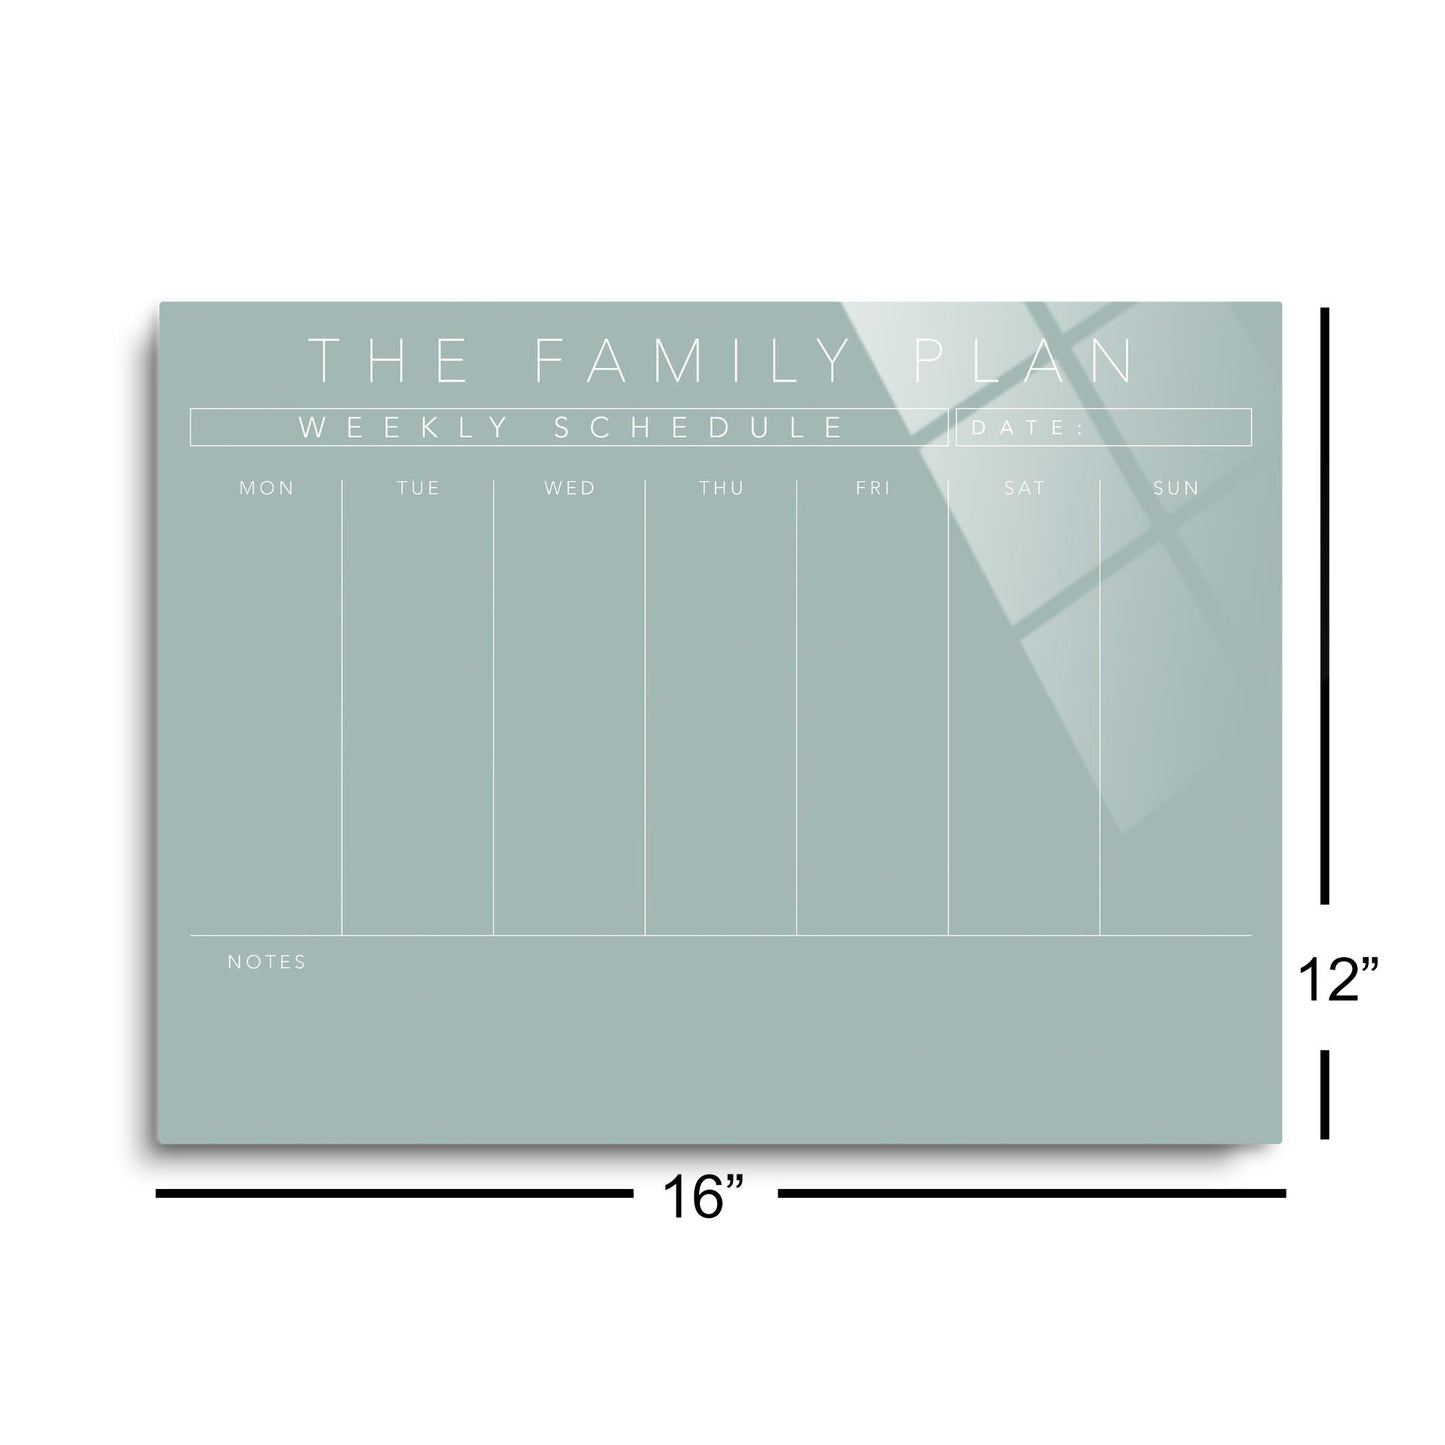 The Family Plan Weekly Schedule Blue